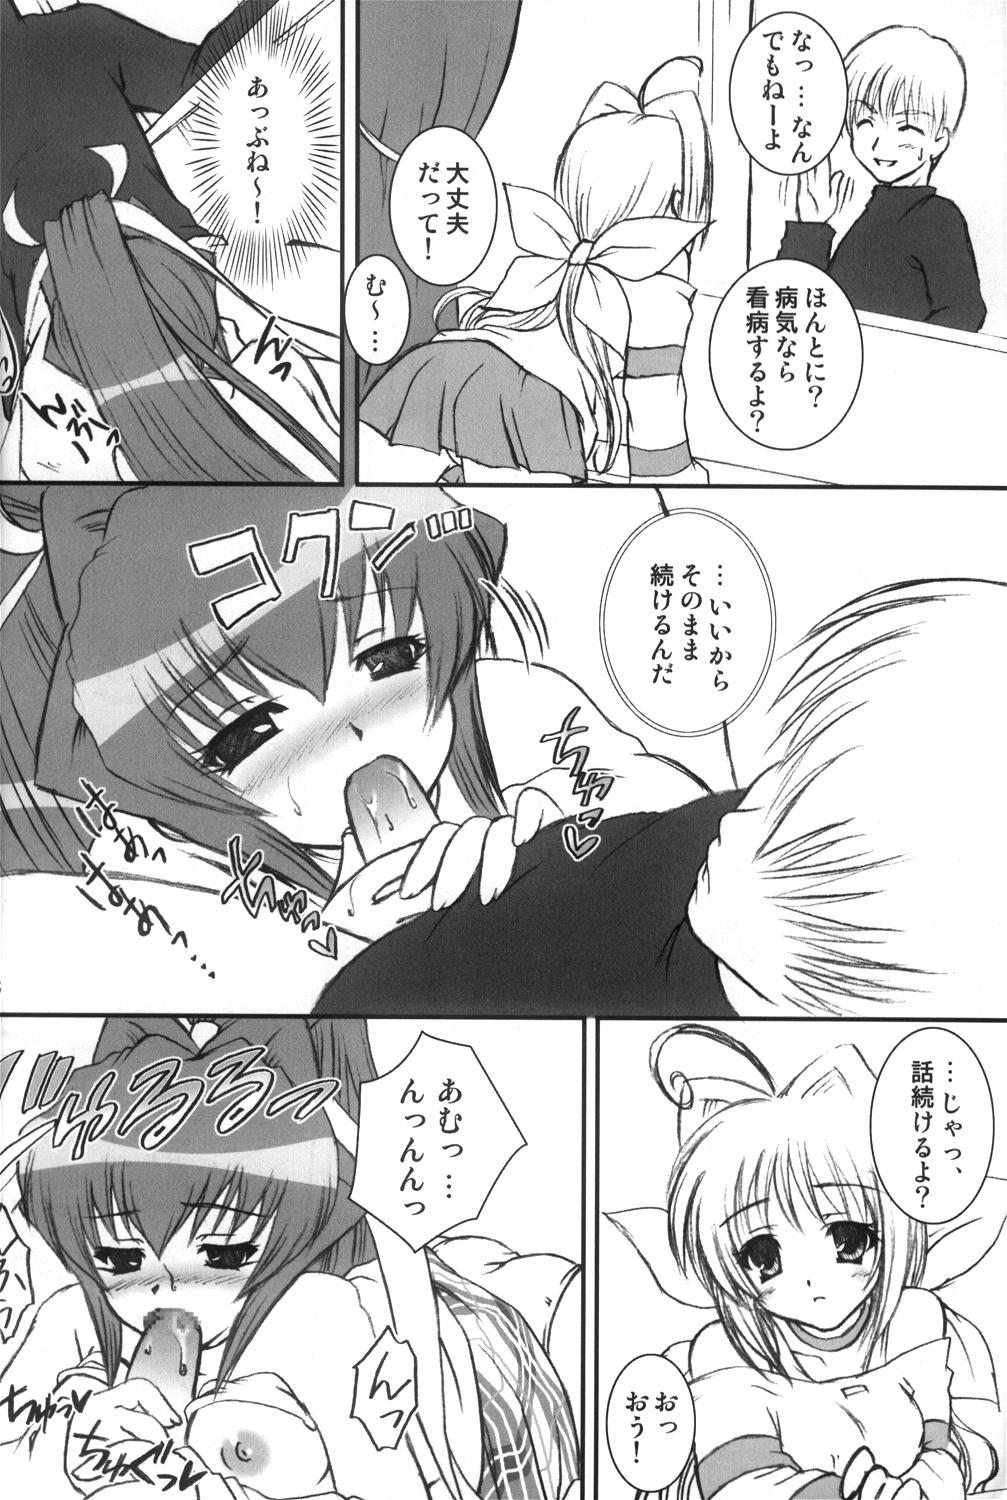 Her I have fallen in love with you... - Muv-luv Blowjob - Page 7